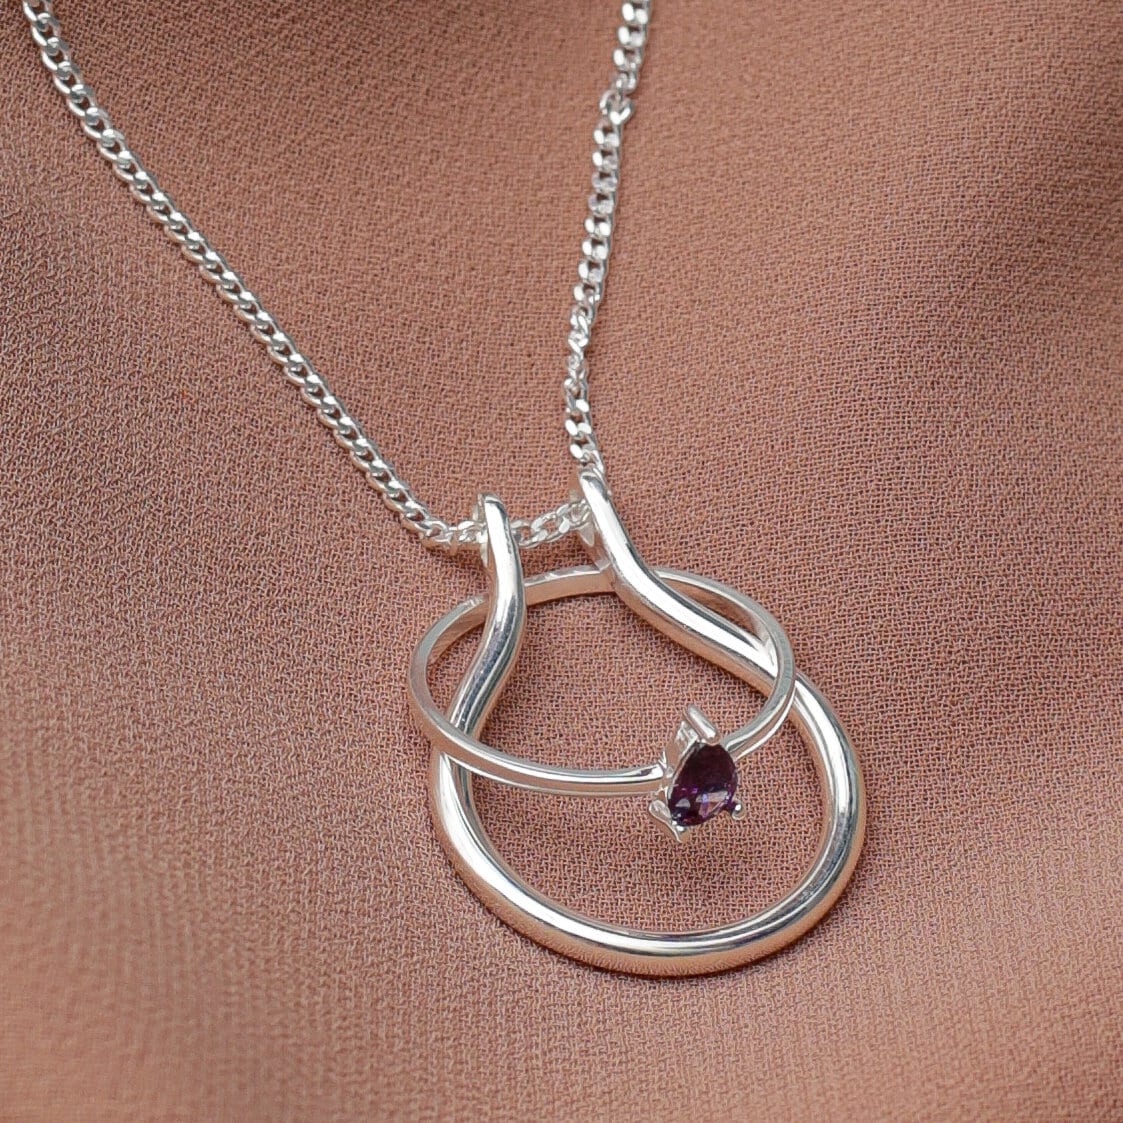 Horseshoe Ring Holder Necklace, Thick Chain Option Necklace Ring Holder Luck, Wedding Ring Holder Pendant, Engagement Gift, For Nurse